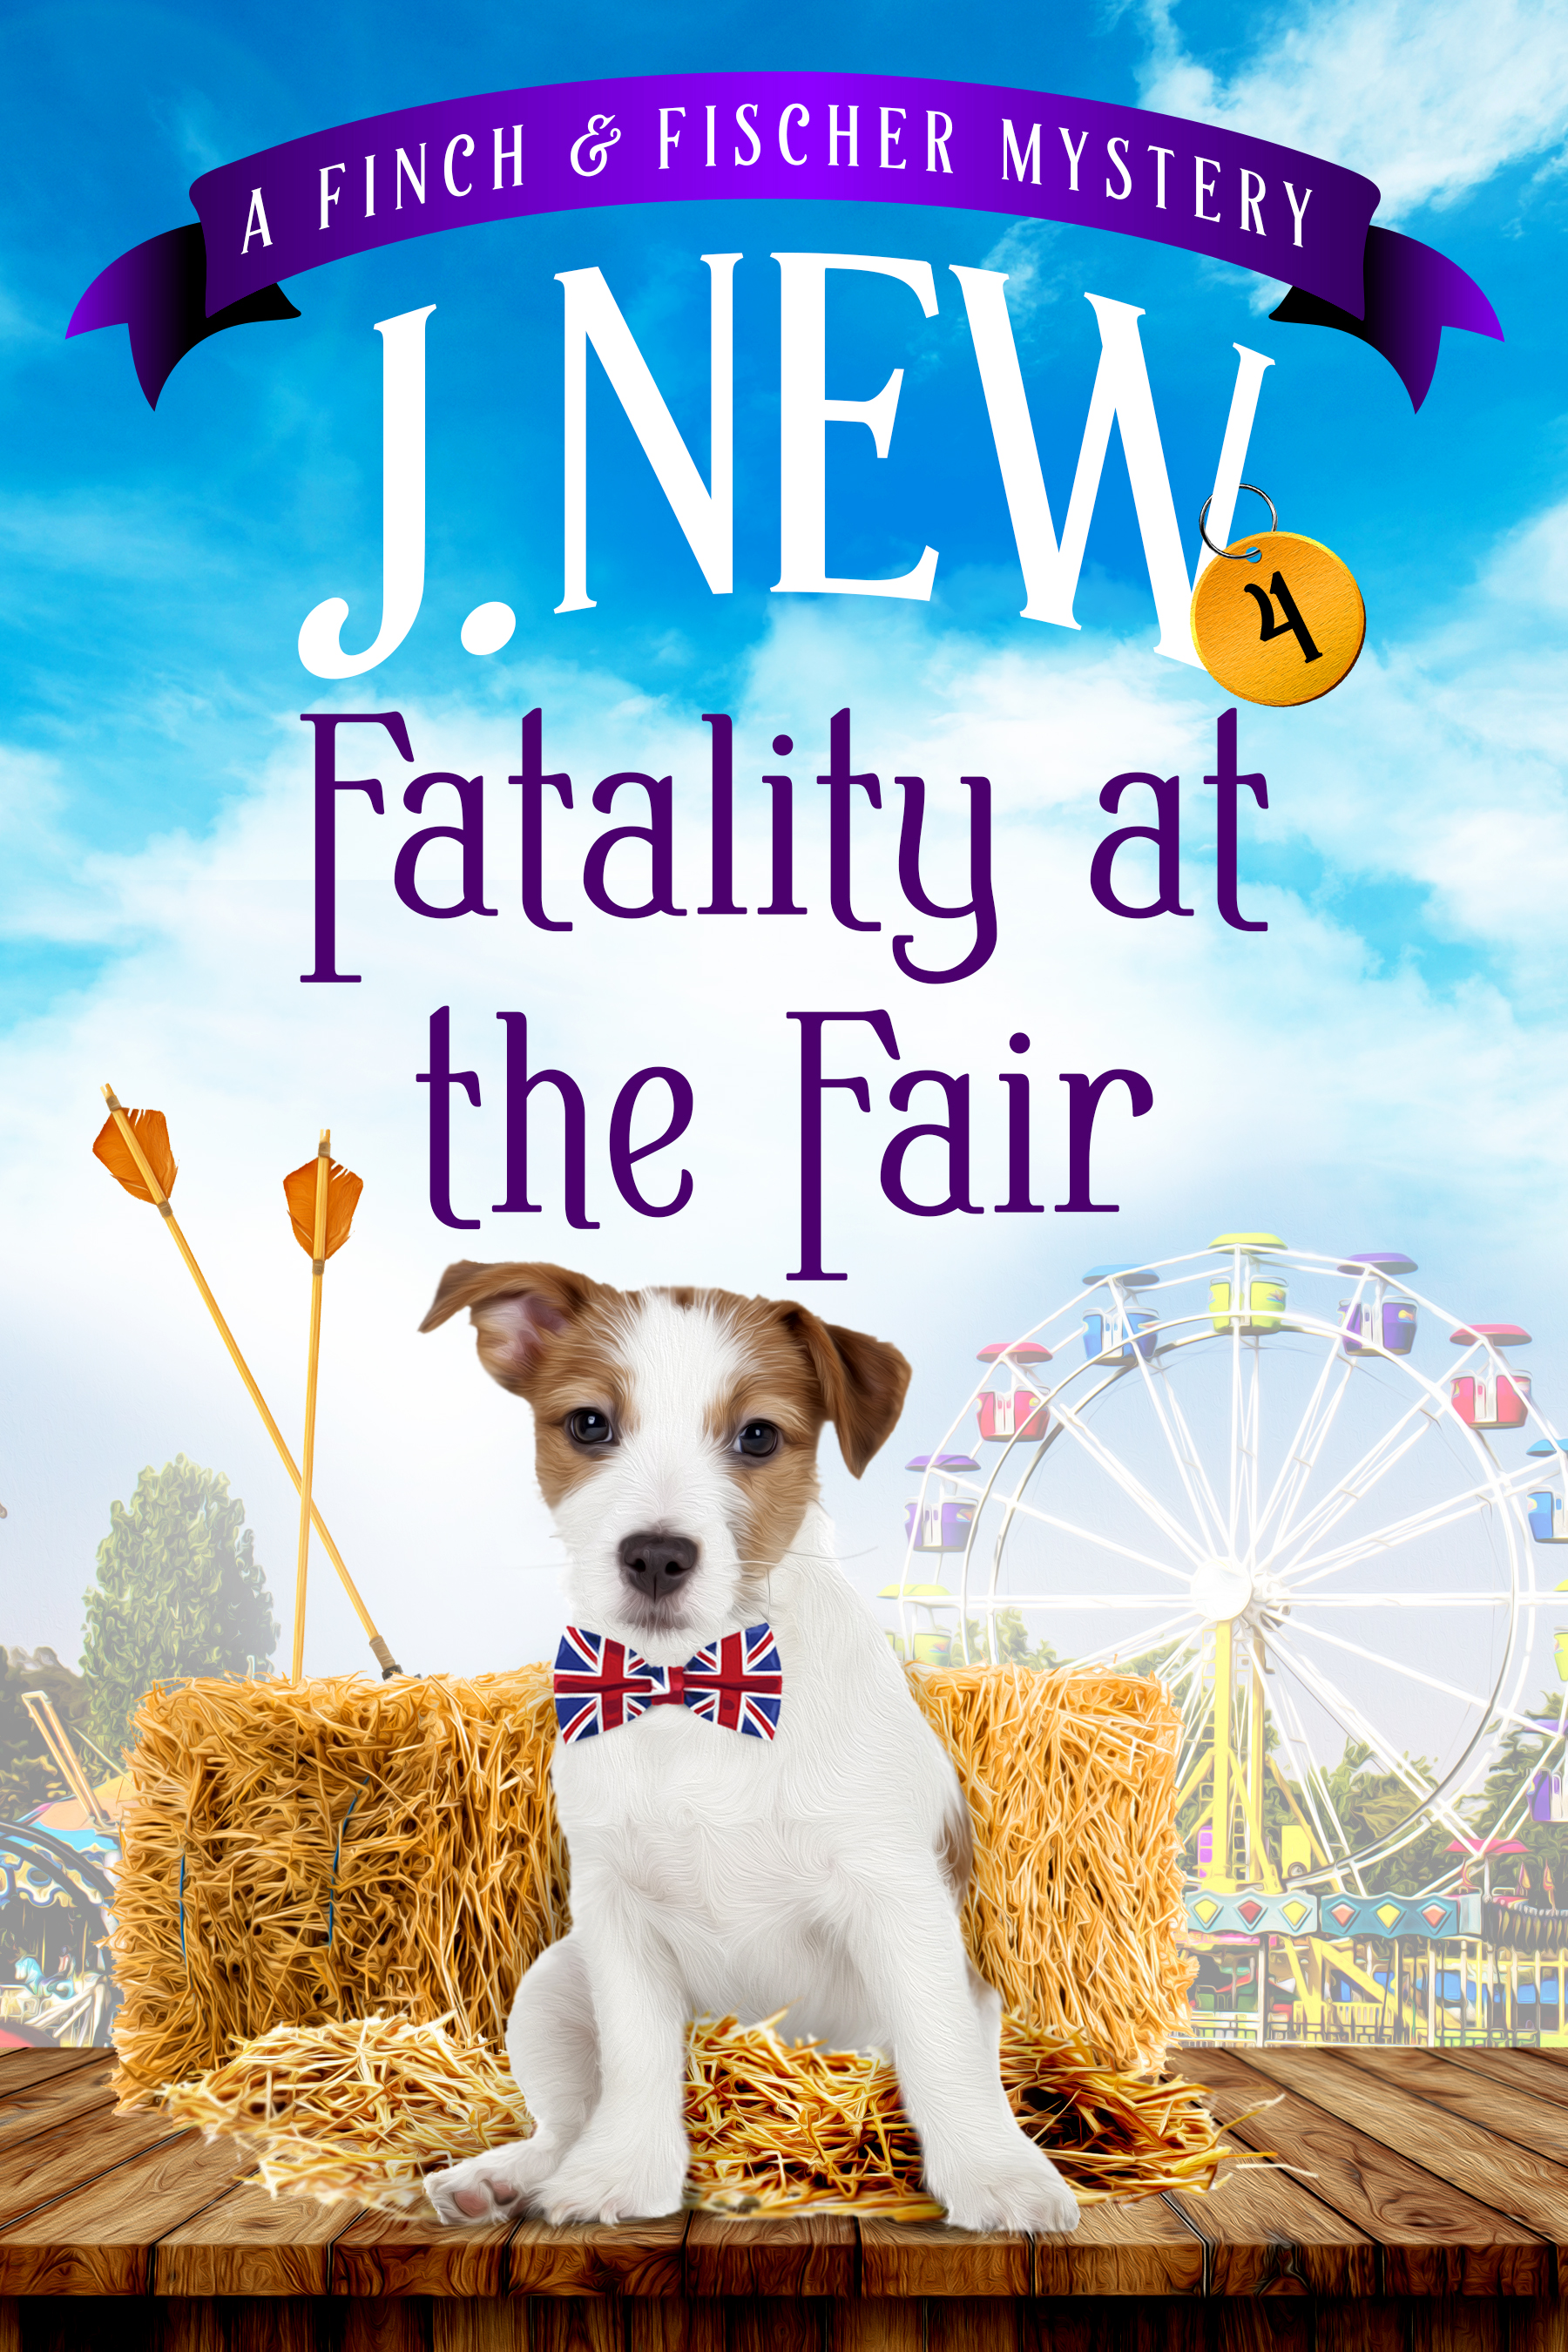 Fatality at the Fair, book 4 in the popular British cozy mystery series featuring mobile librarian Penny Finch and dog detective Fischer